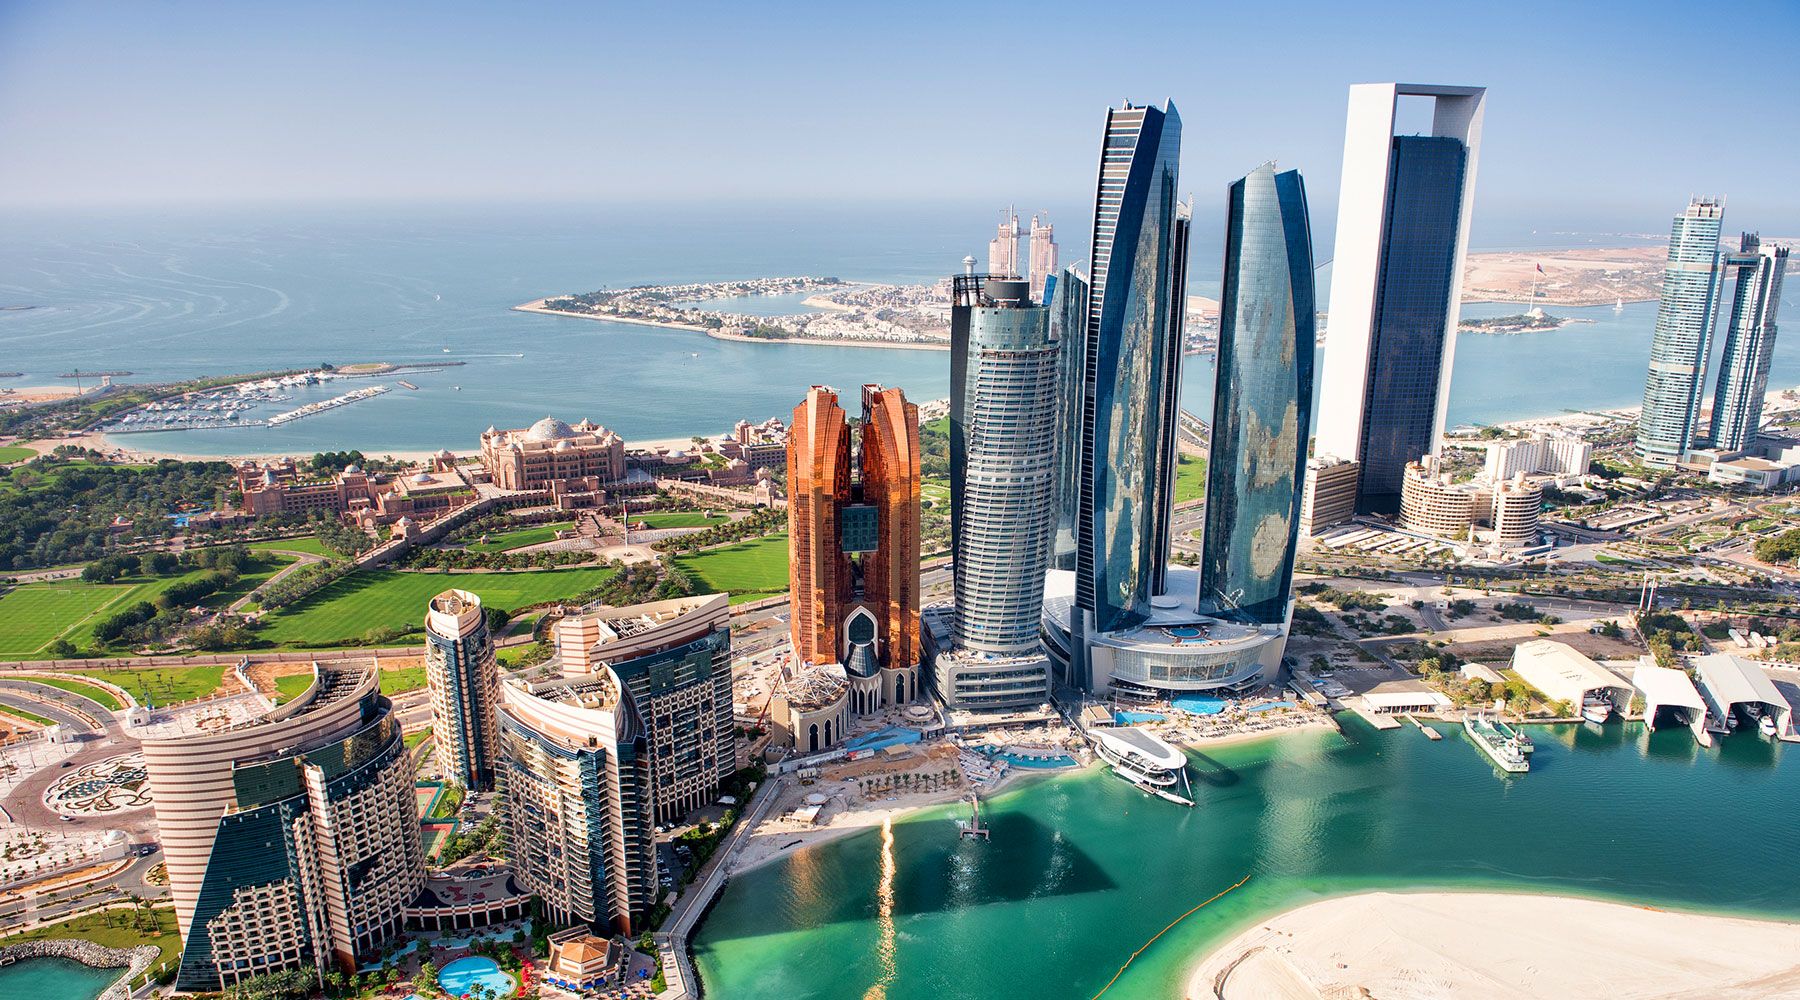 Abu Dhabi: Hotels, Restaurants and Lounges Reopening - Coming Soon in UAE